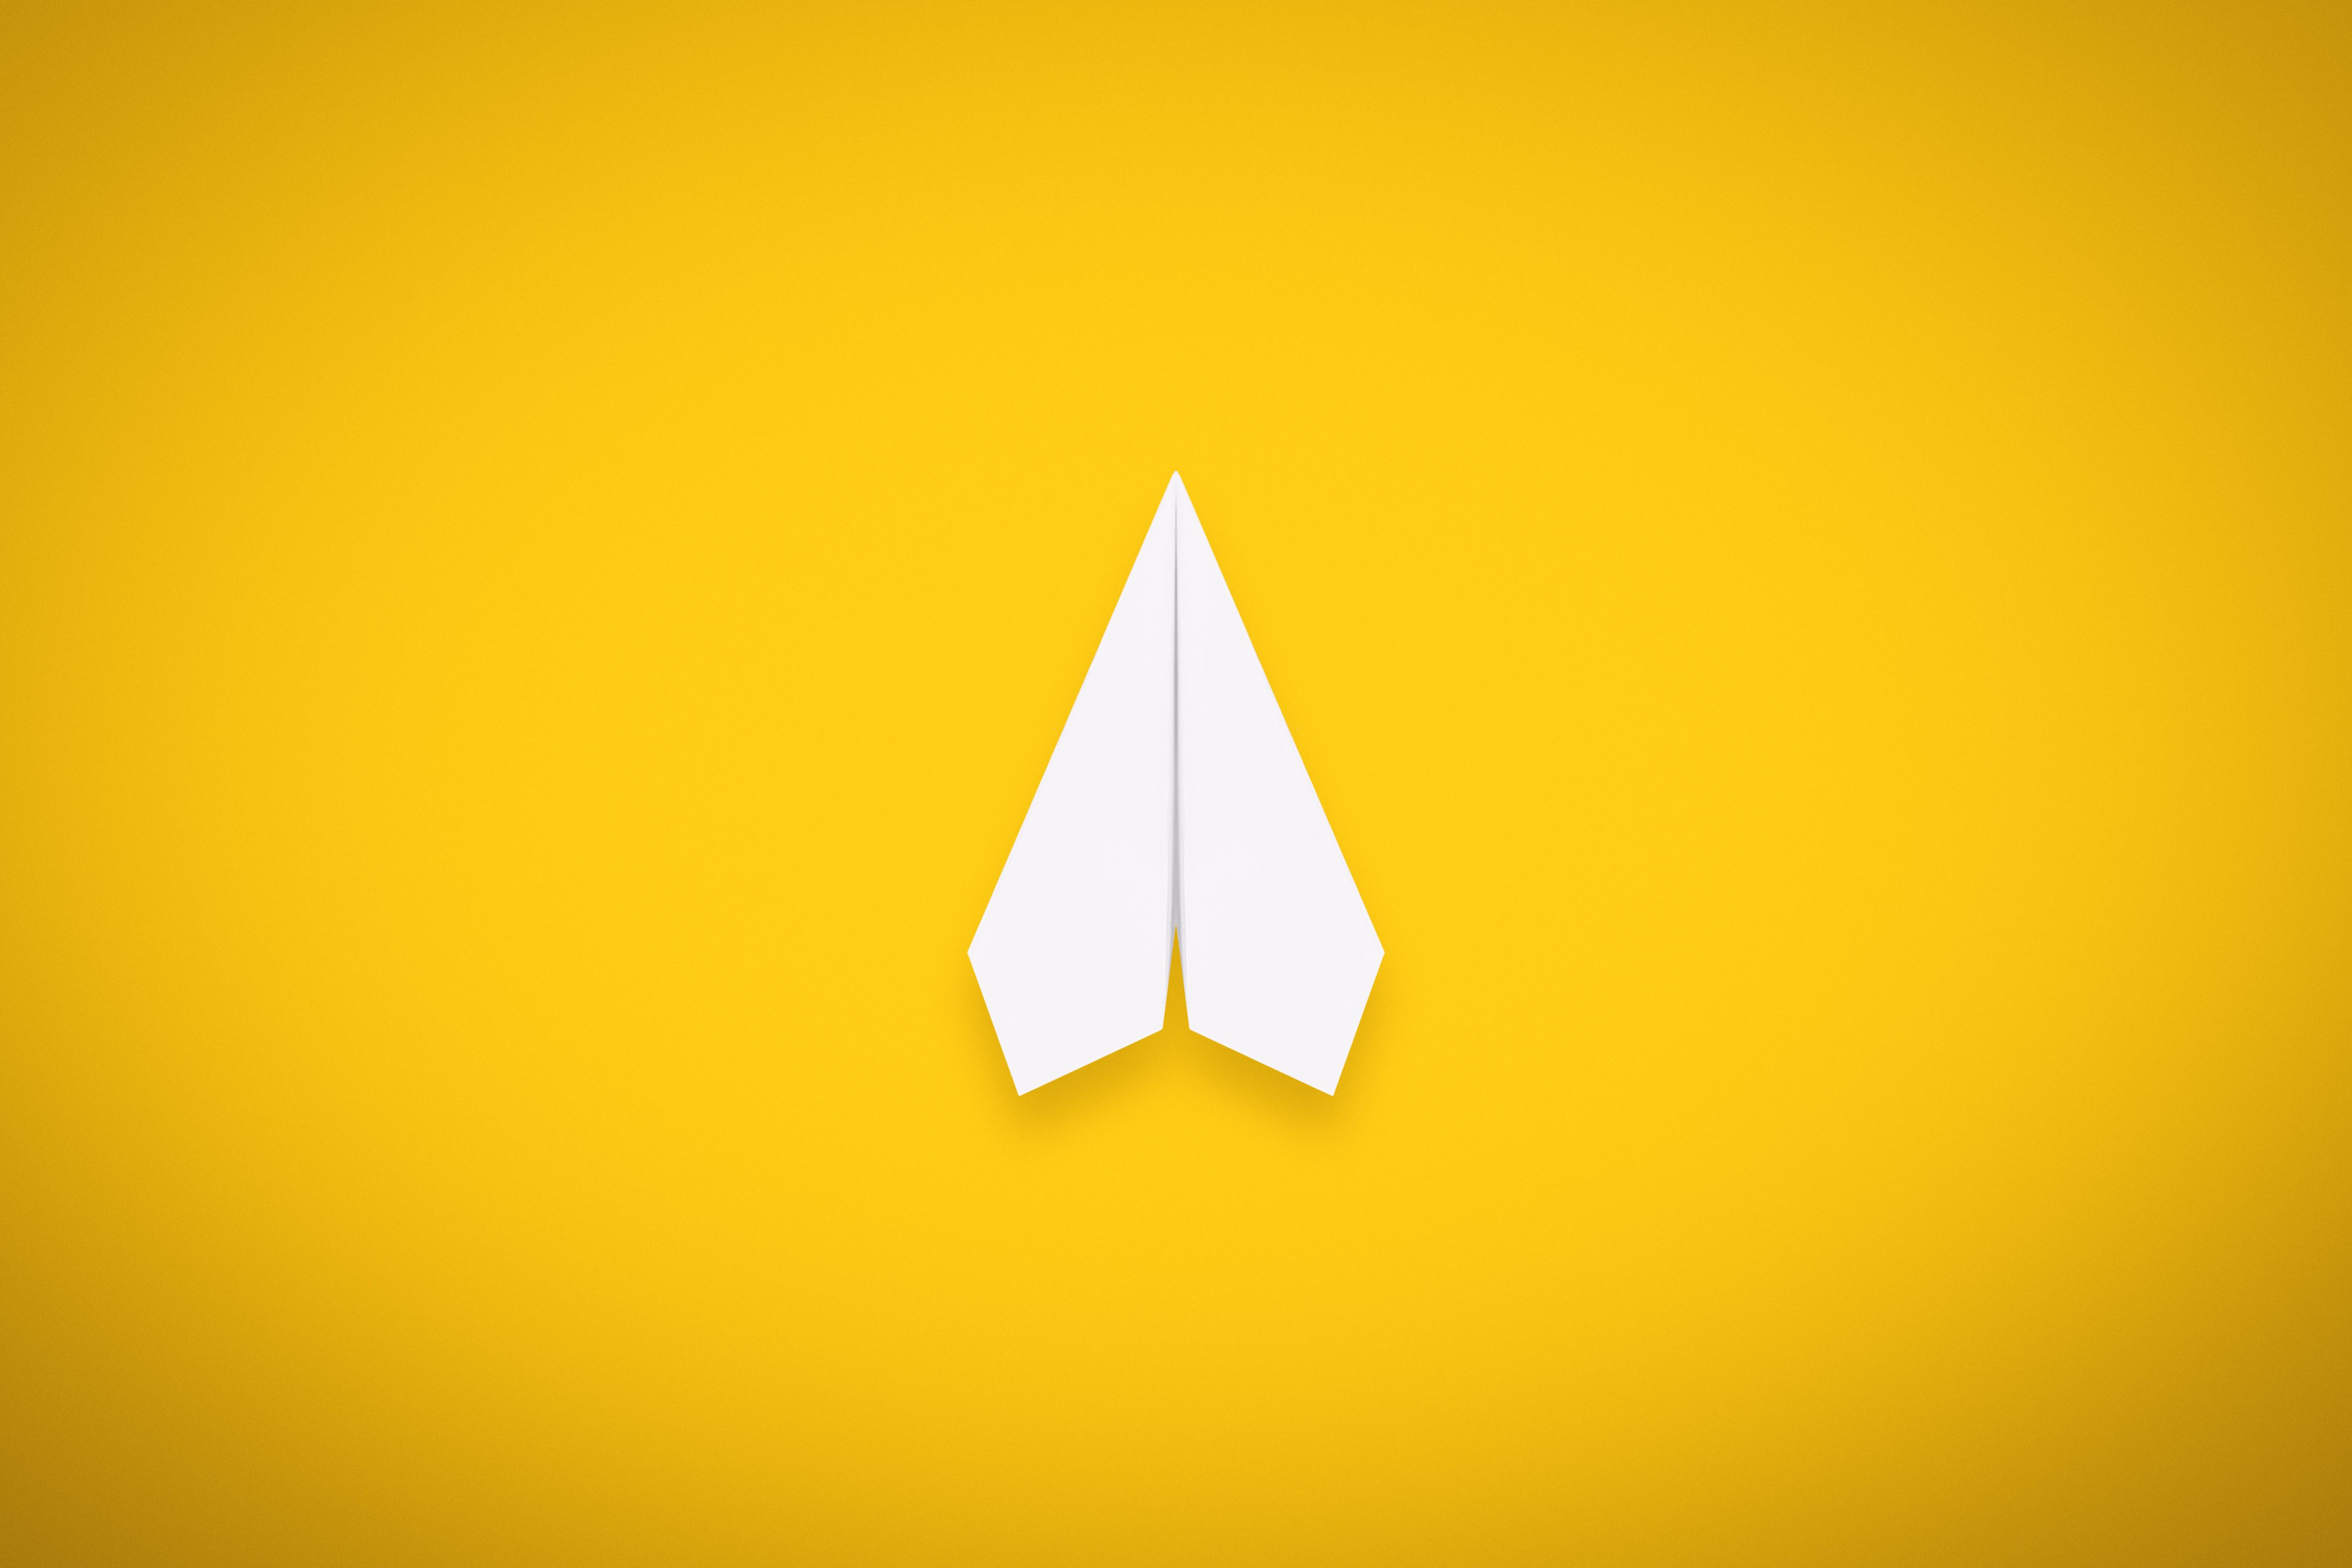 A Single Paper Airplane on Yellow Background